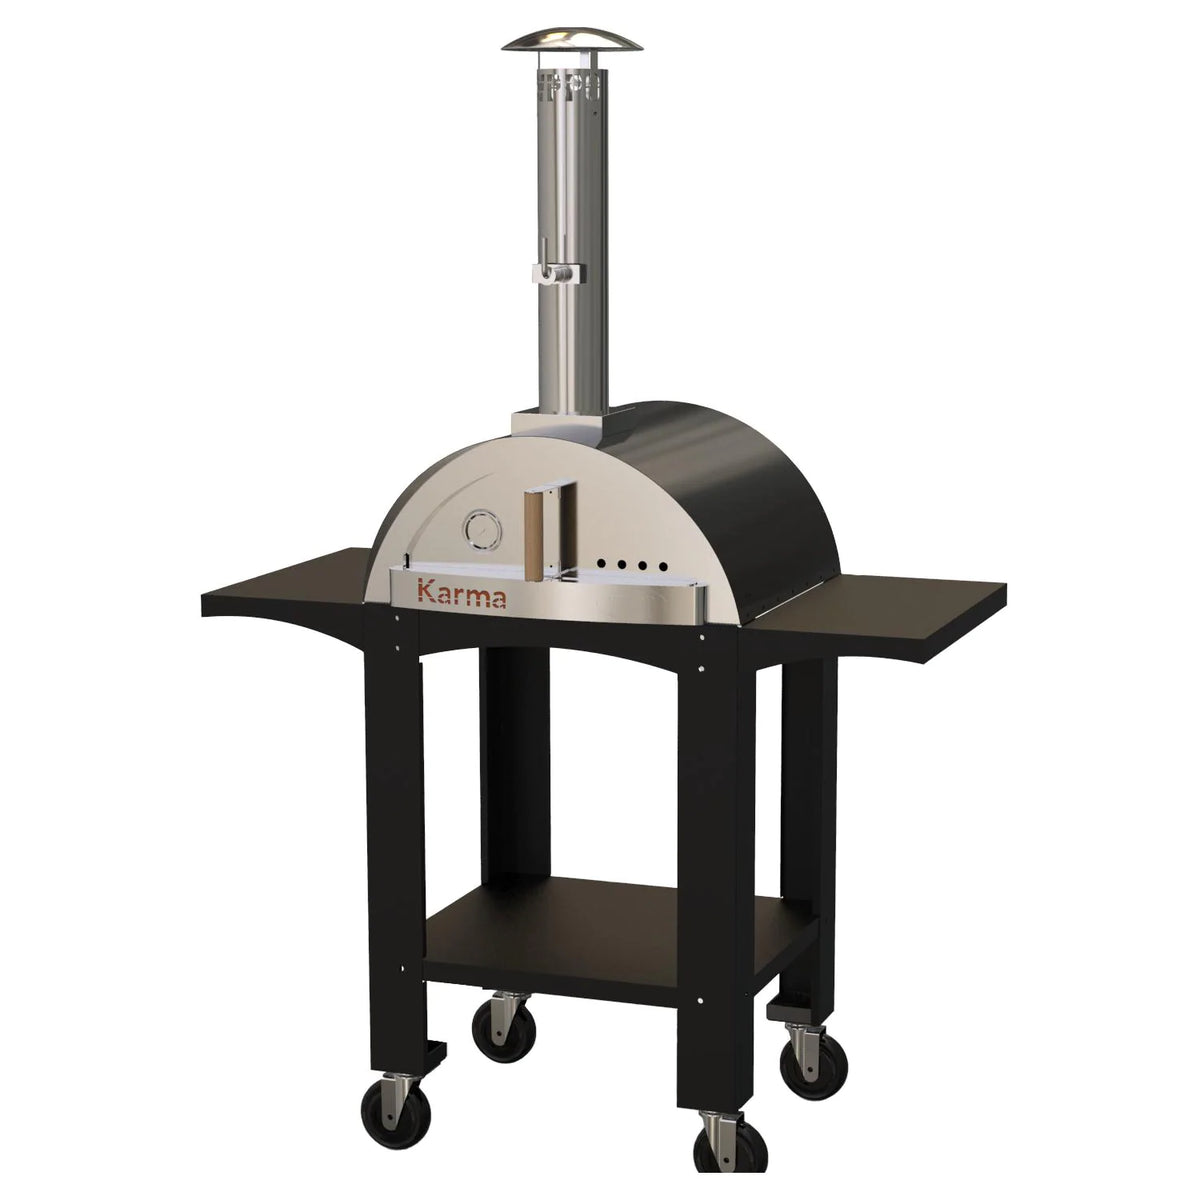 WPPO Karma 25 Inch Stainless Steel Wood Fired Freestanding Outdoor Pizza Oven Black Front  View